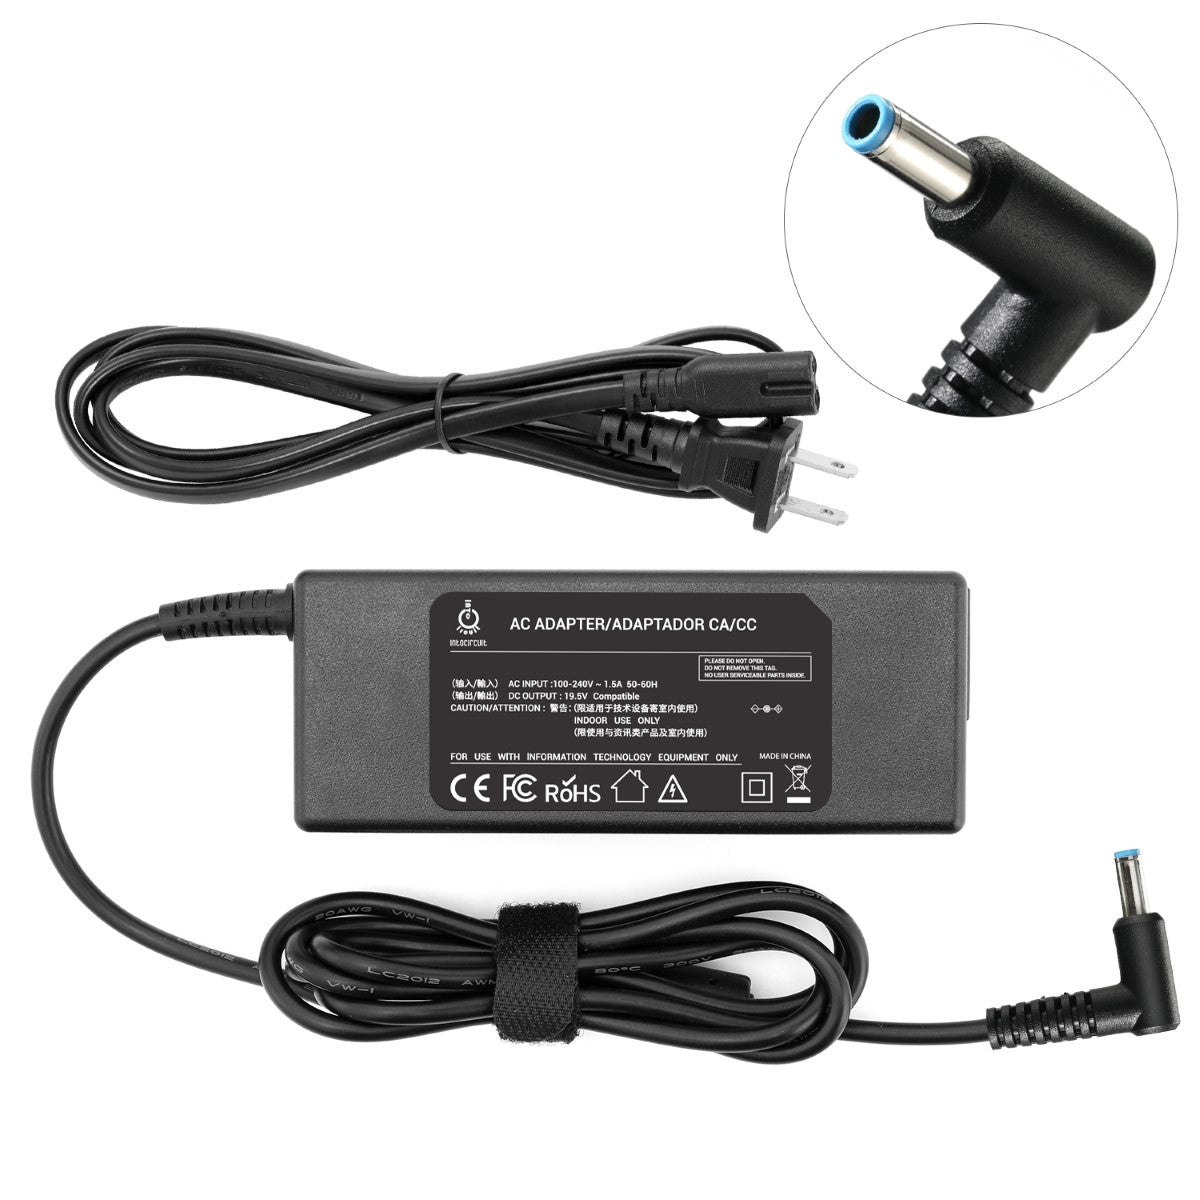 Charger for HP 15-g317cl Touchsmart Laptop